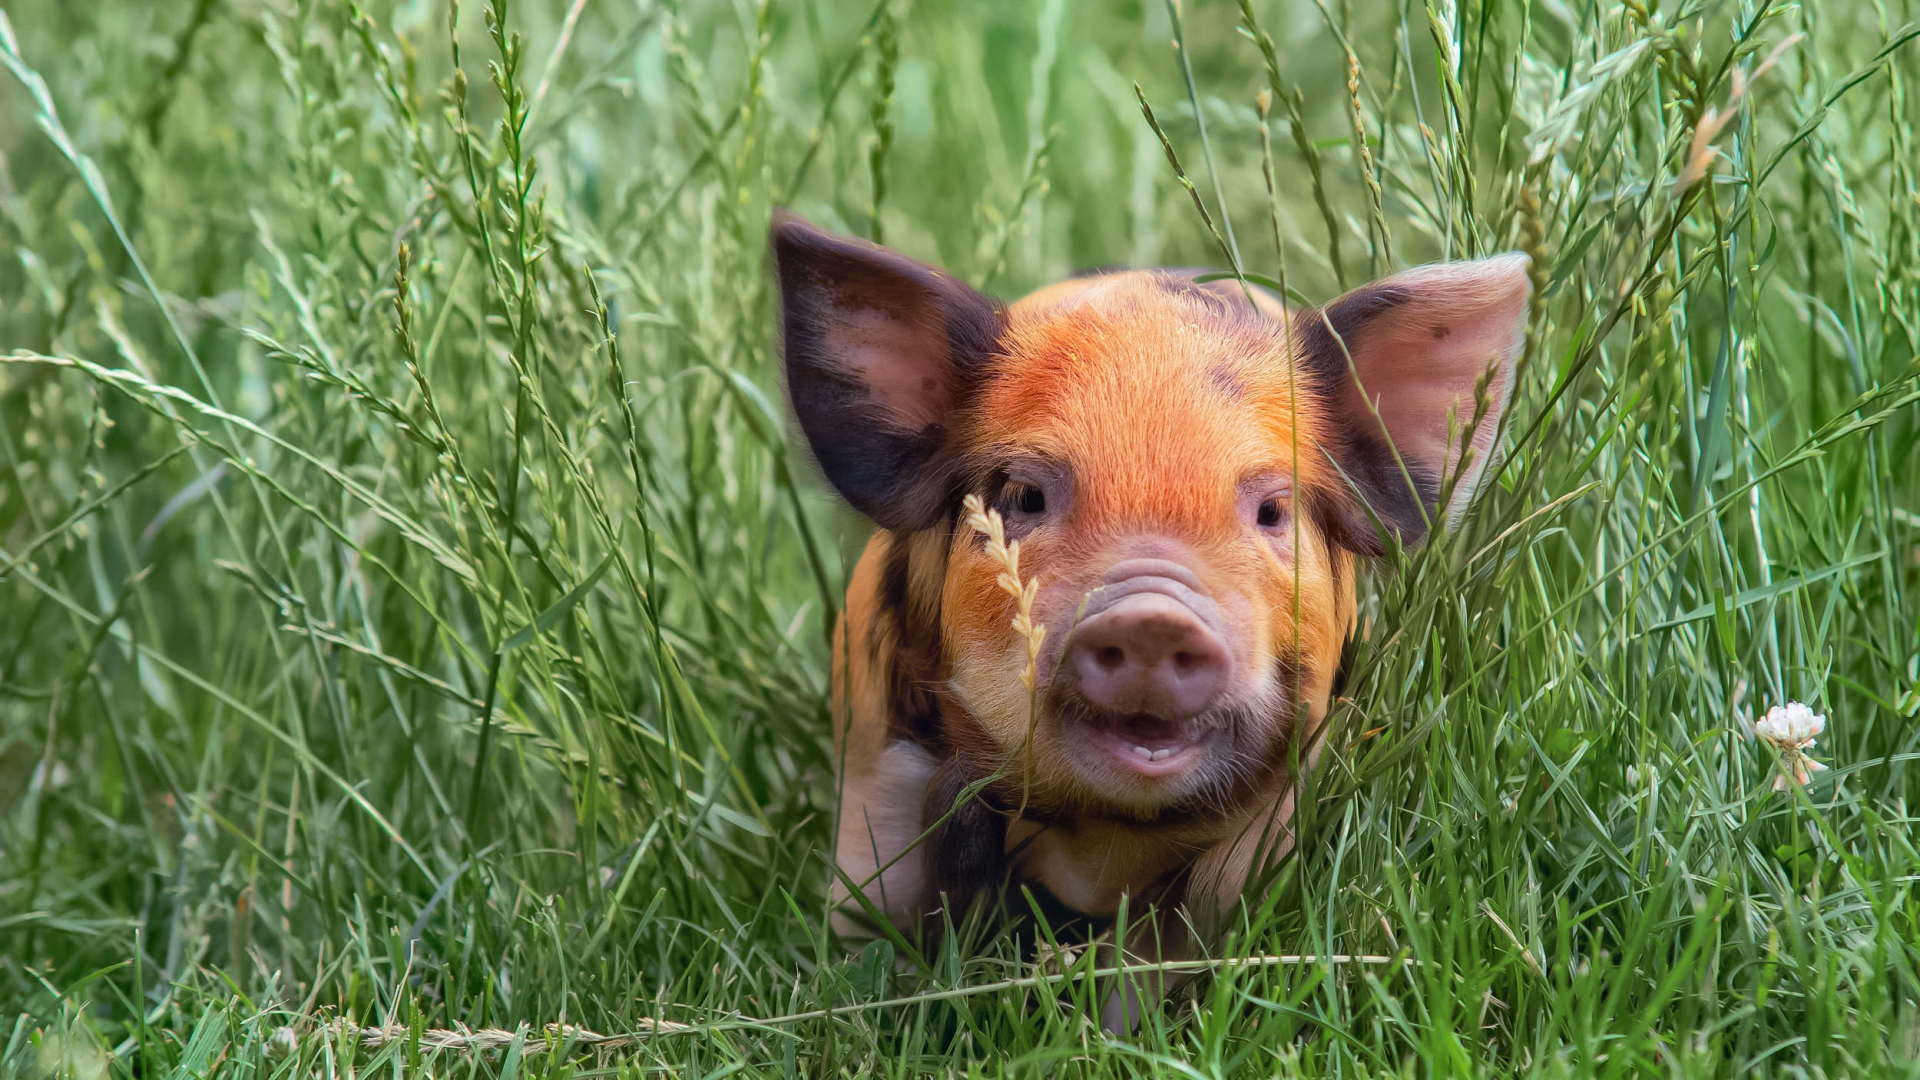 Little funny pig in the green grass